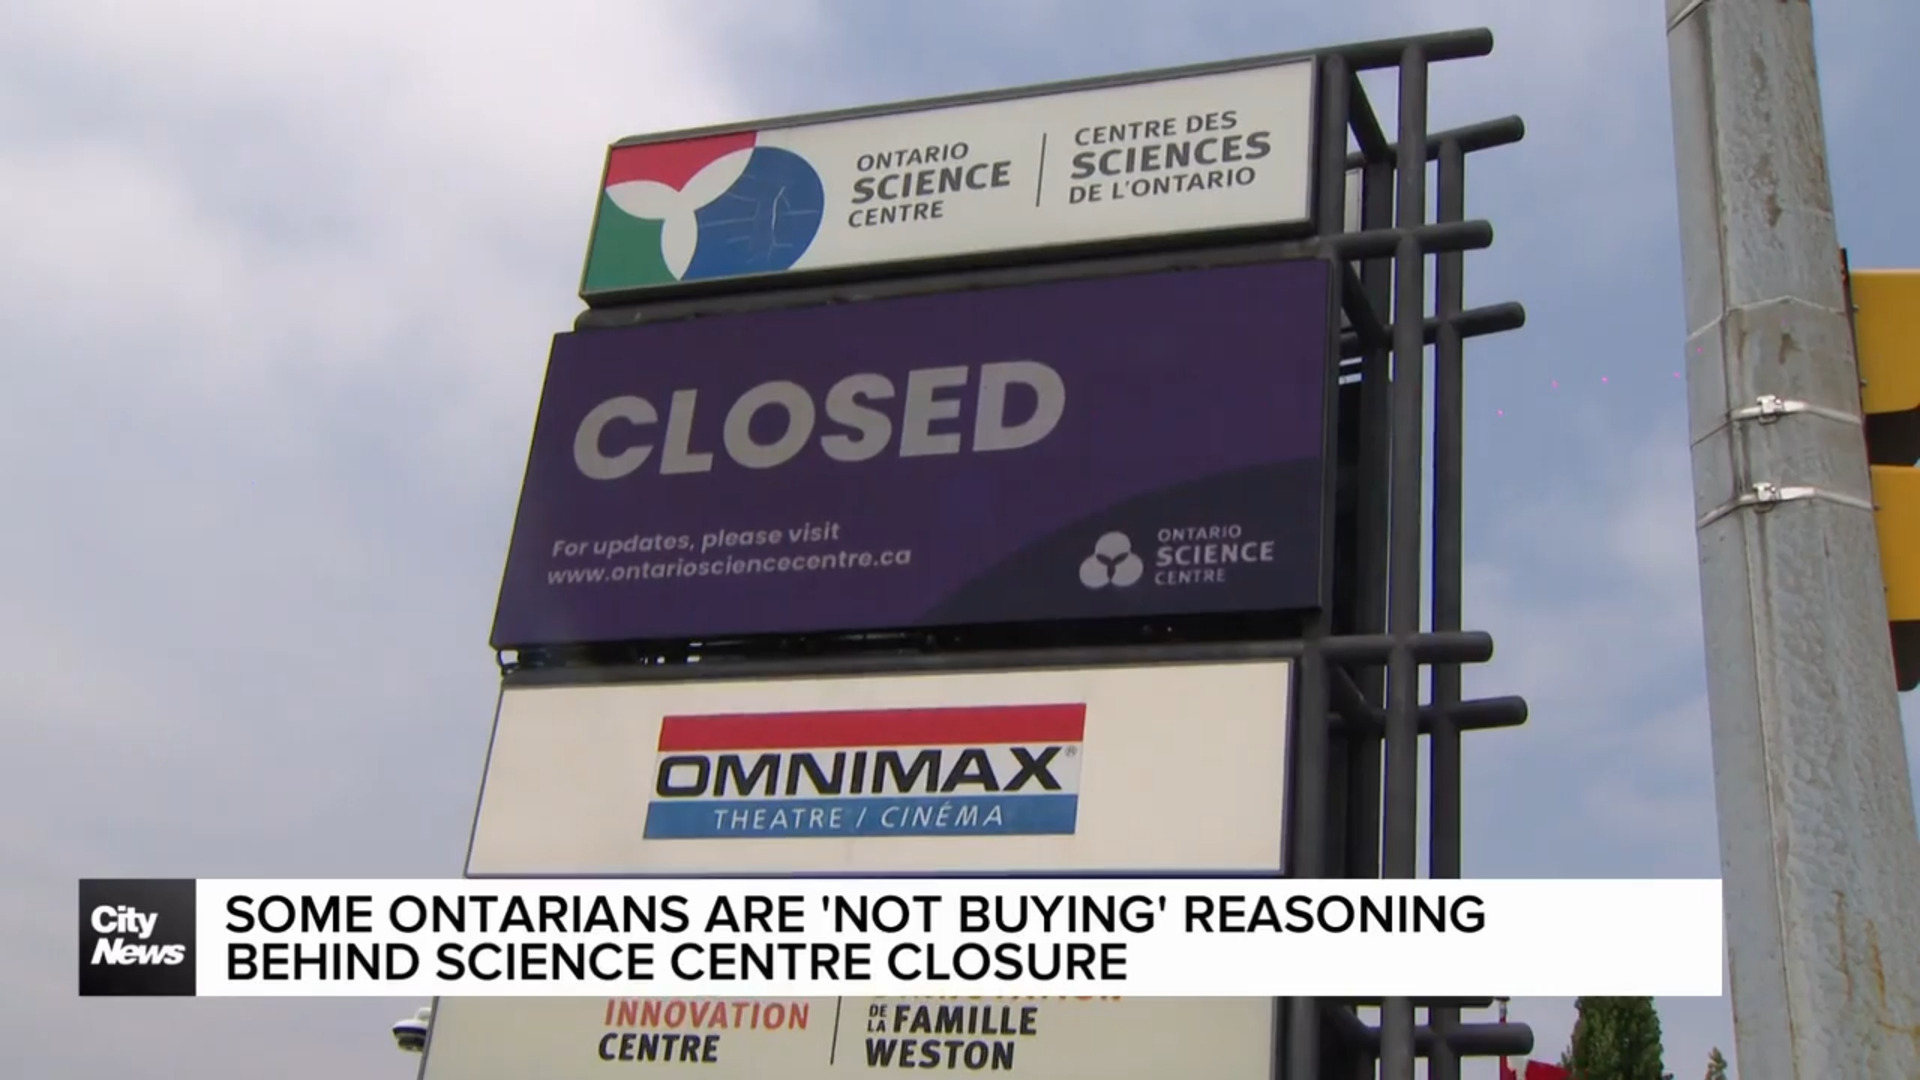 'People are frustrated, feeling disrespected' with Science Centre closure